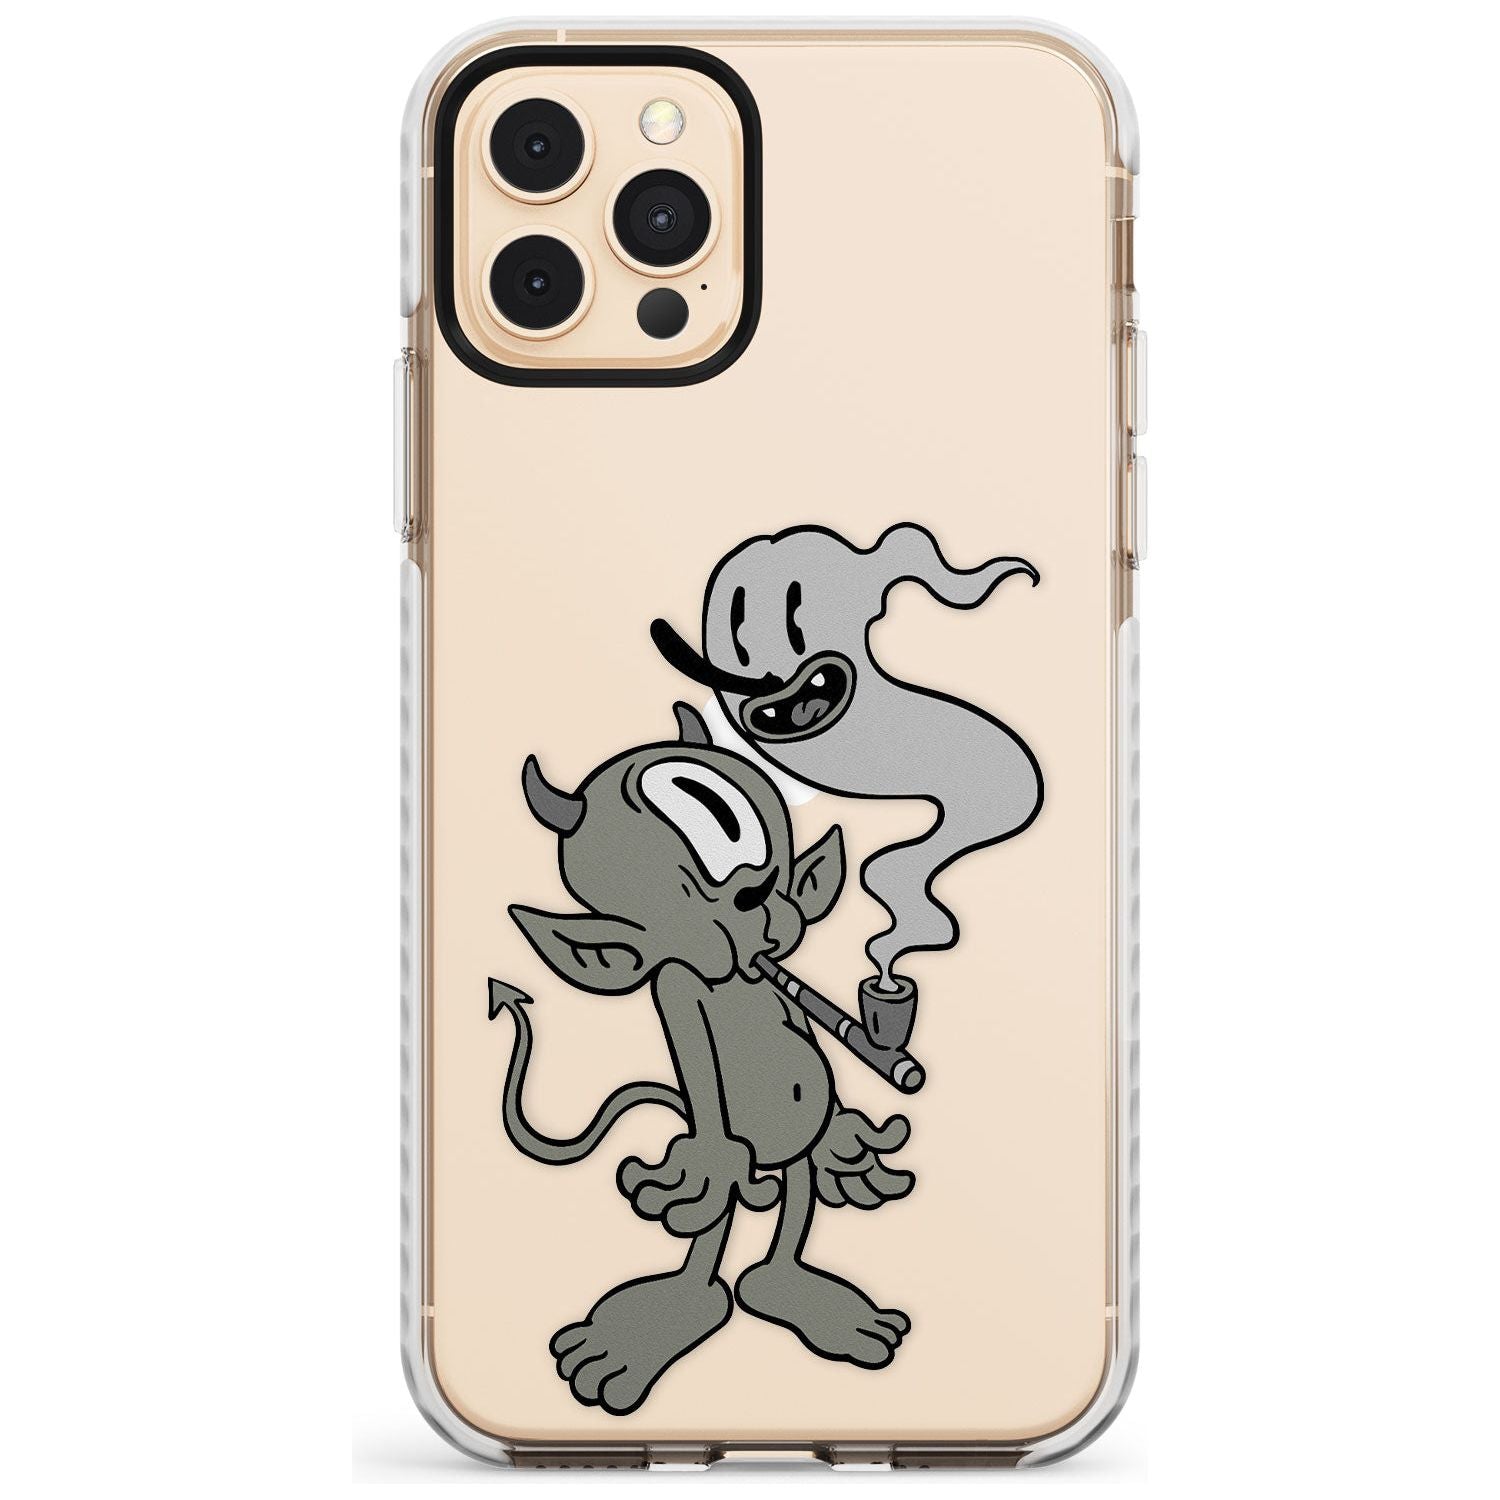 Pipe Goblin Impact Phone Case for iPhone 11 Pro Max